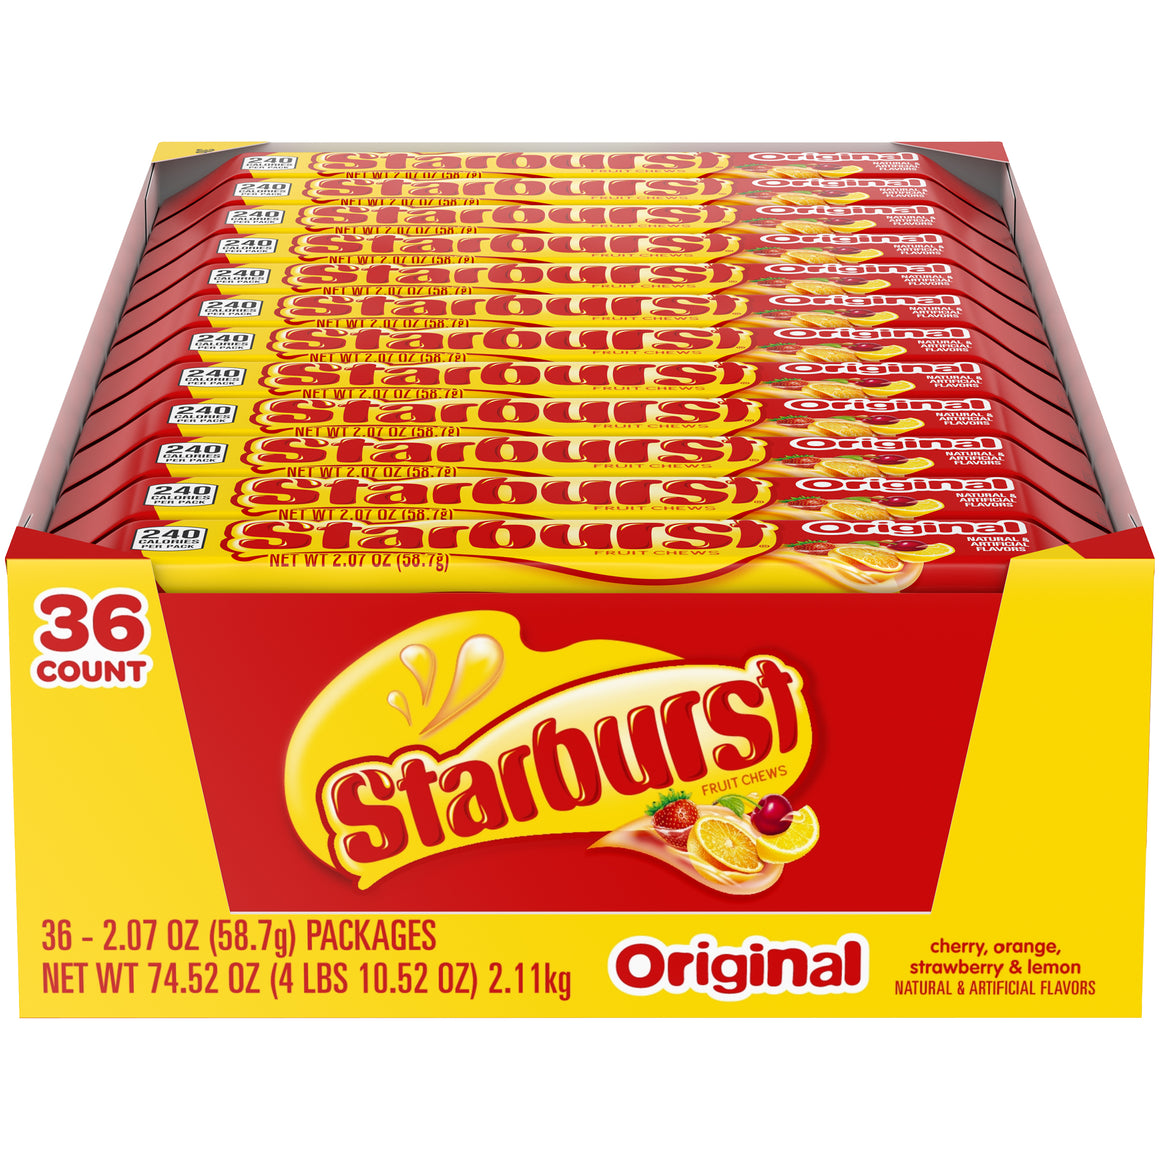 All City Candy Starburst Fruit Chews Original Fruits - 2.07-oz. Bar Chewy Wrigley 1 Bar For fresh candy and great service, visit www.allcitycandy.com